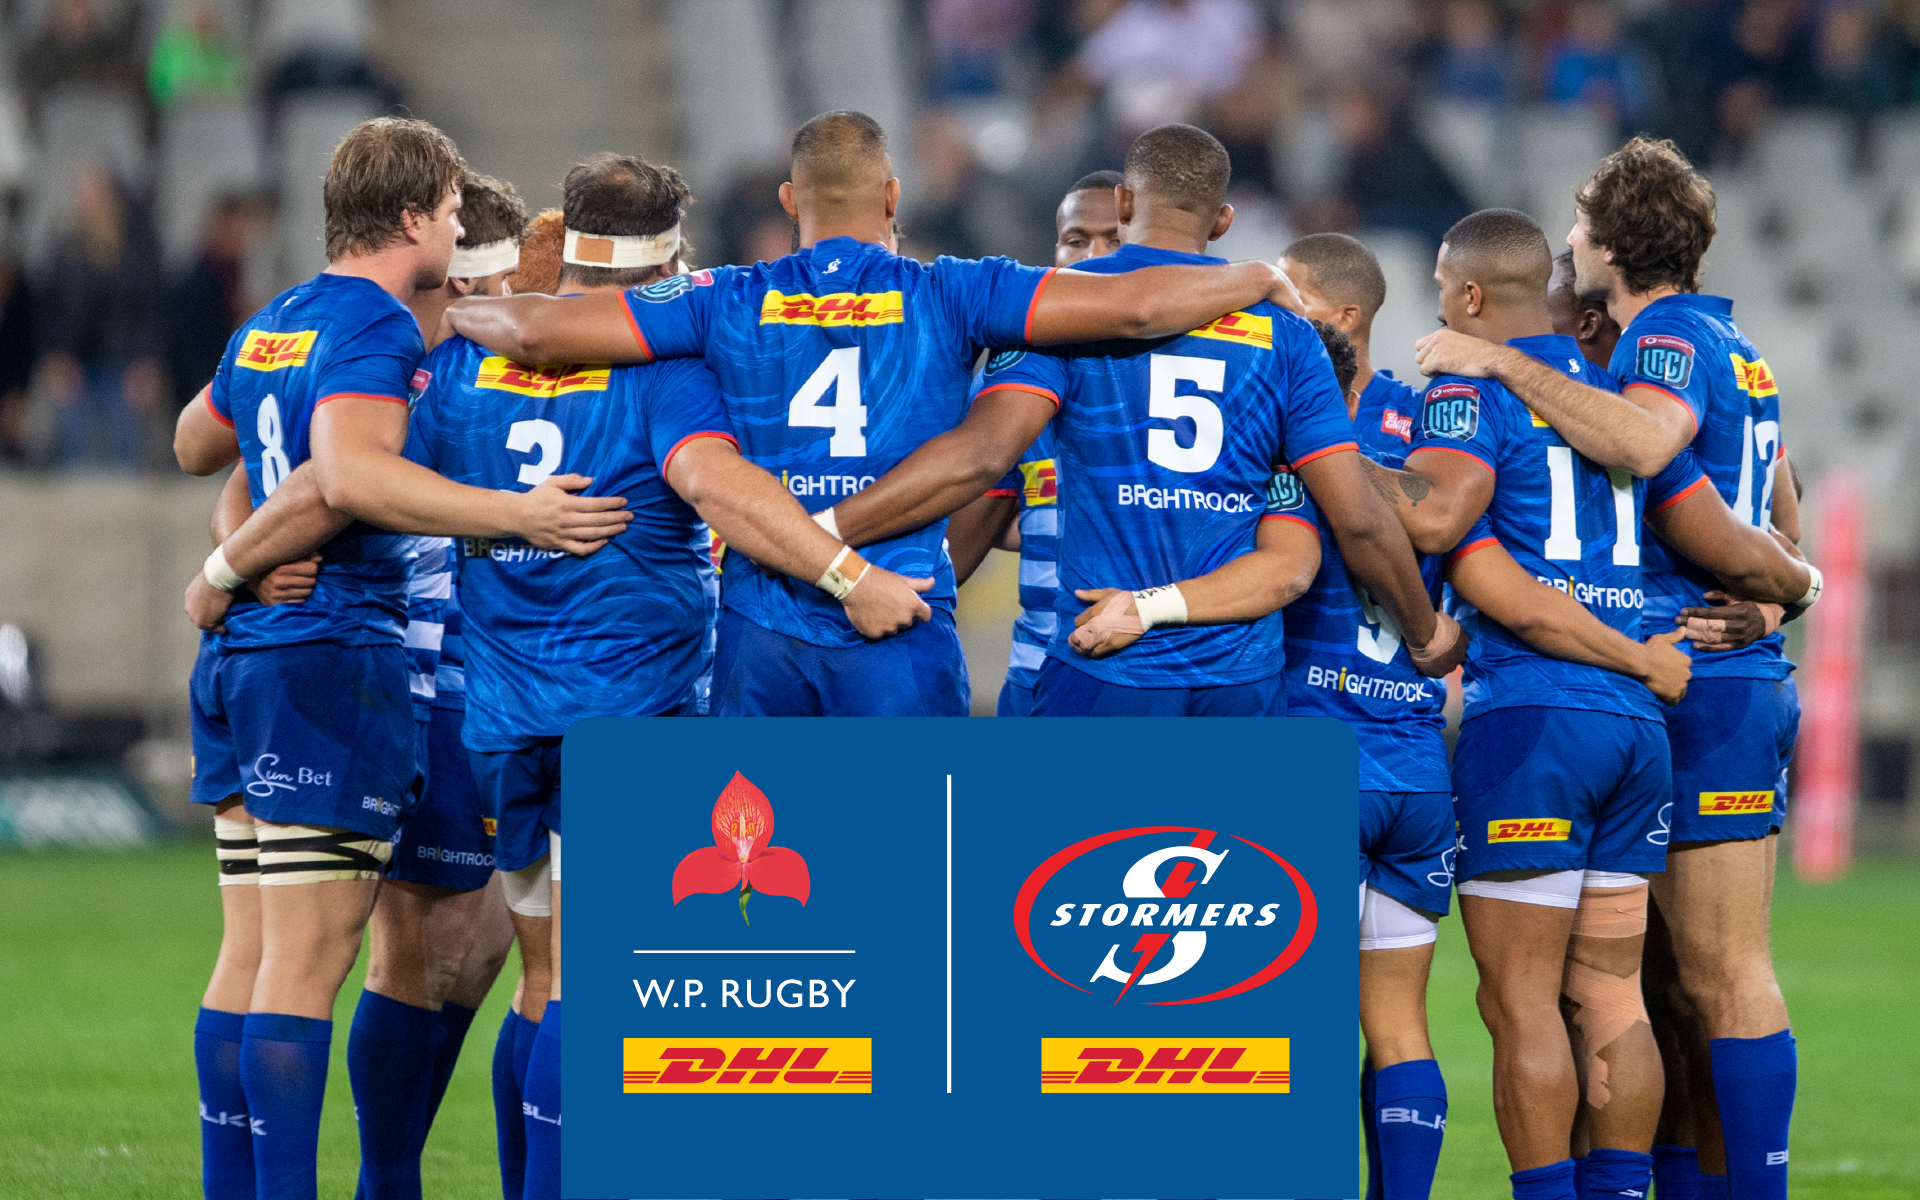 The DHL Stormers and DHL Western Province